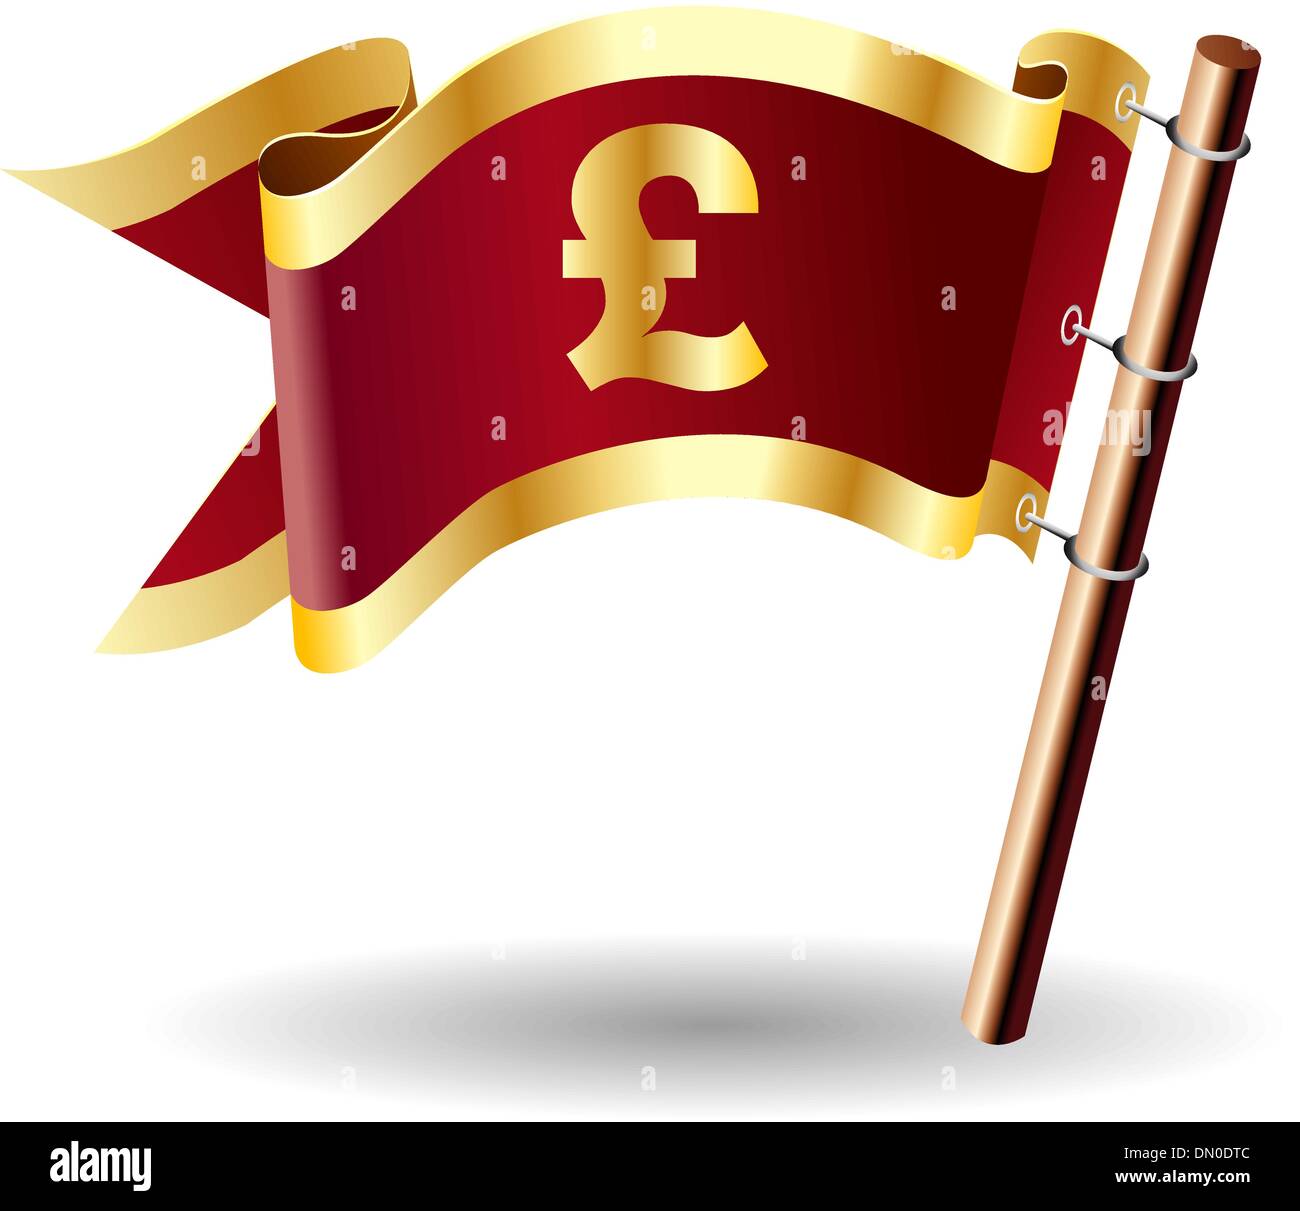 British pound currency royal flag Stock Vector